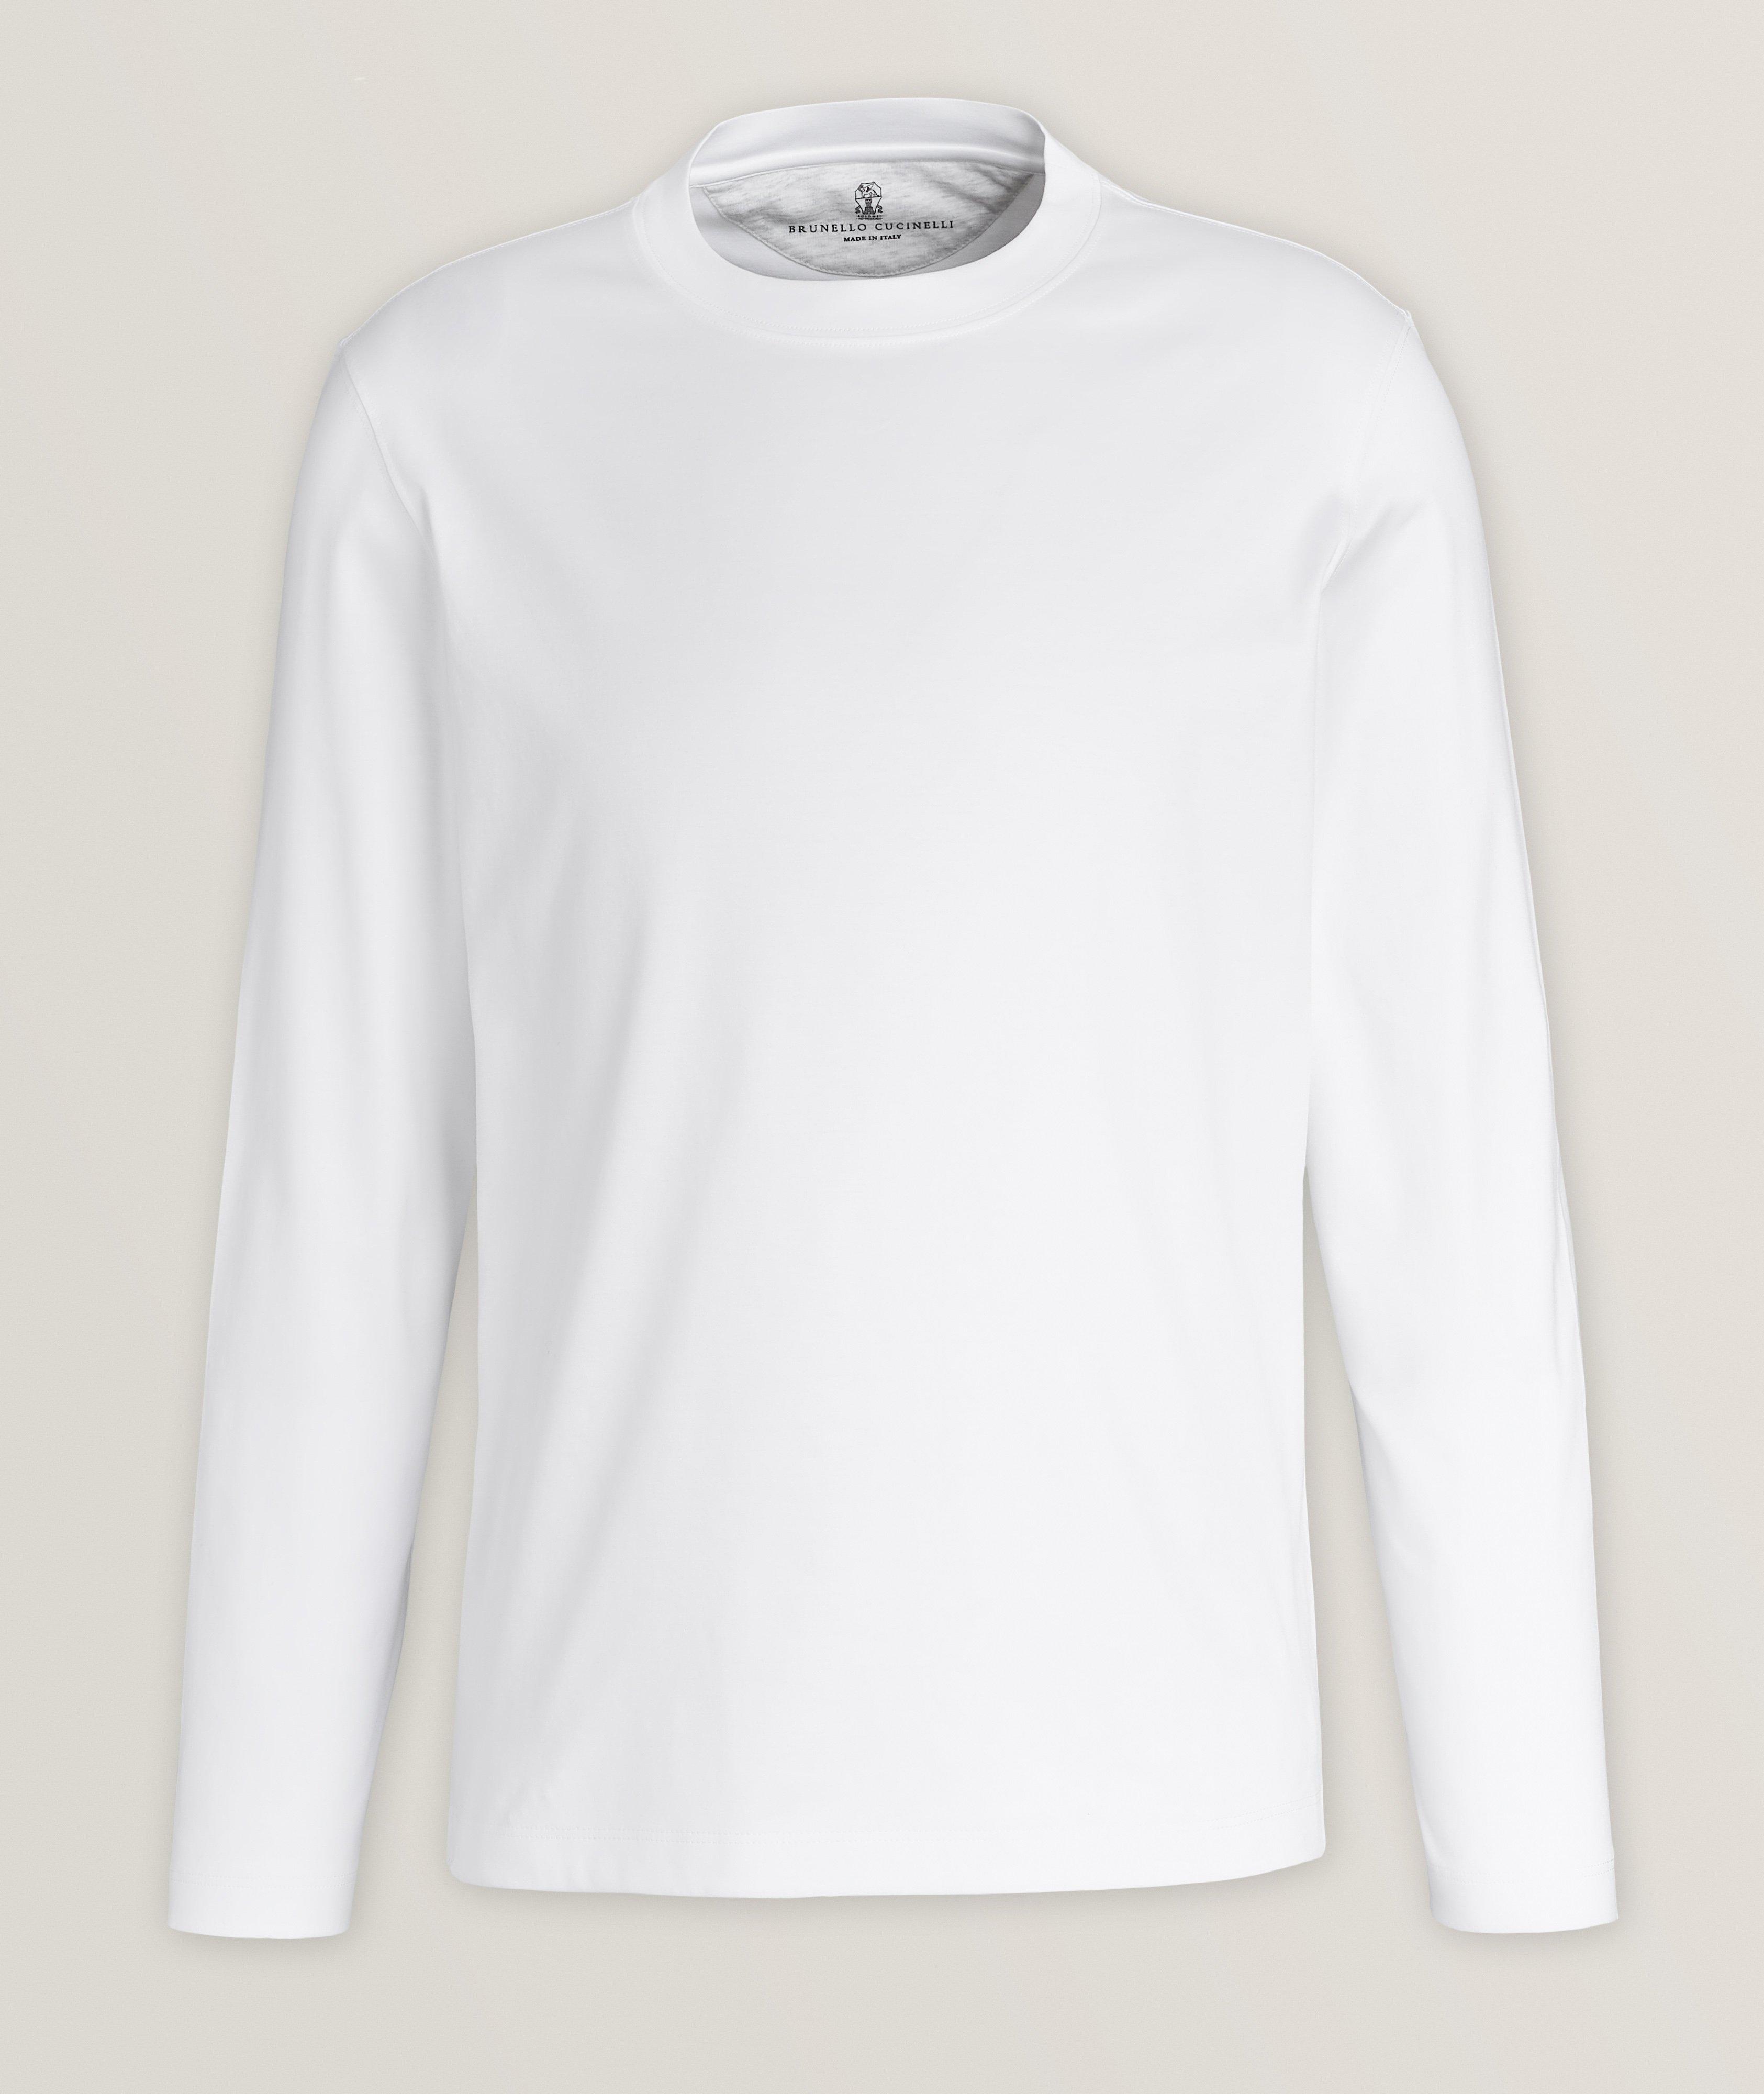 Essential Long-Sleeve Jersey Cotton T-Shirt  image 0